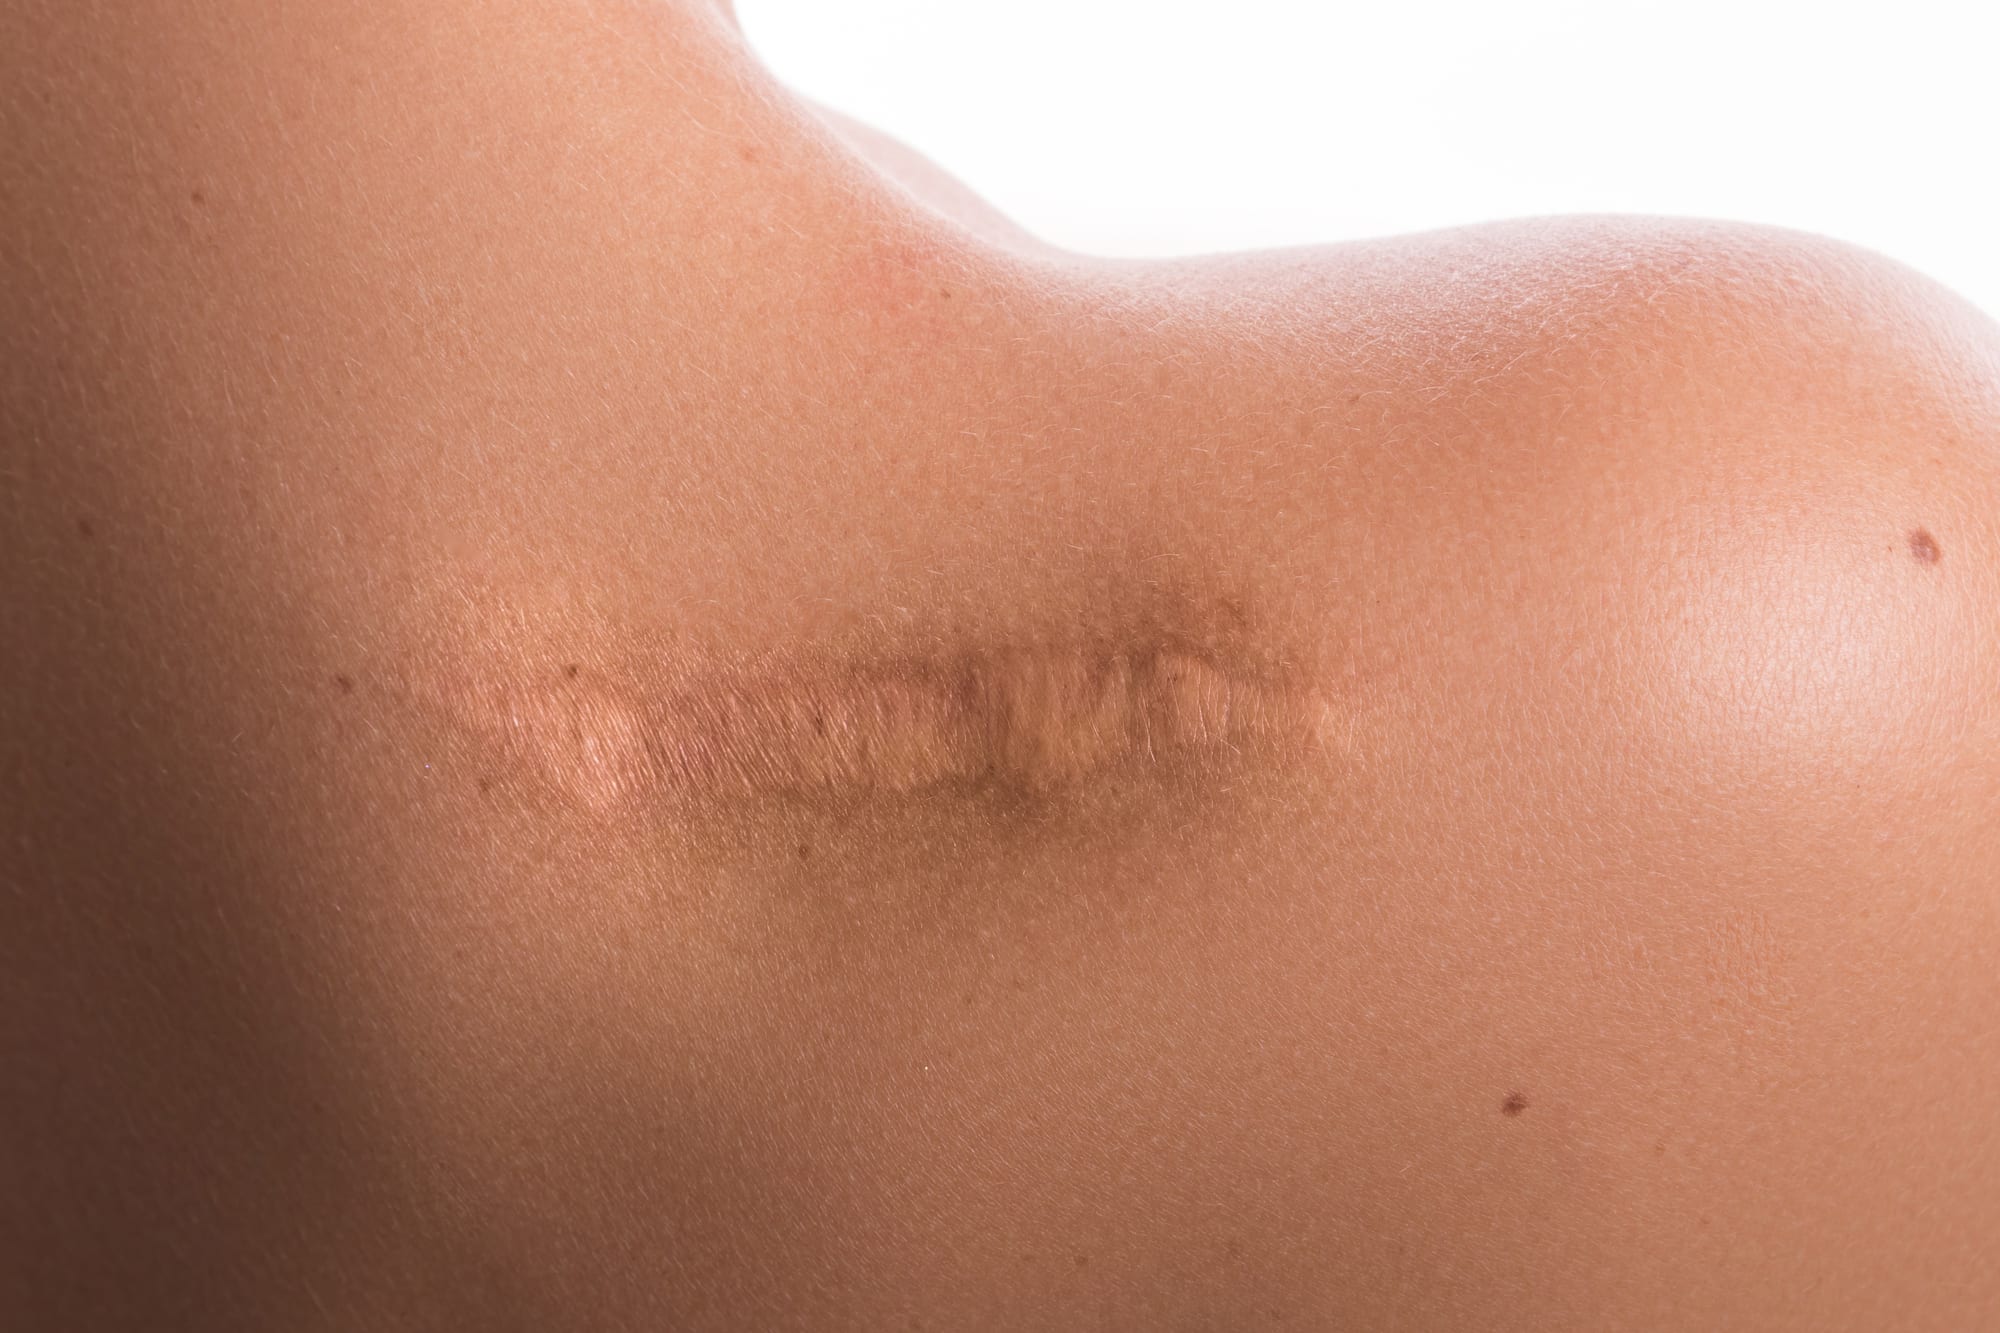 Scar tissue: Causes, prevention, and treatment